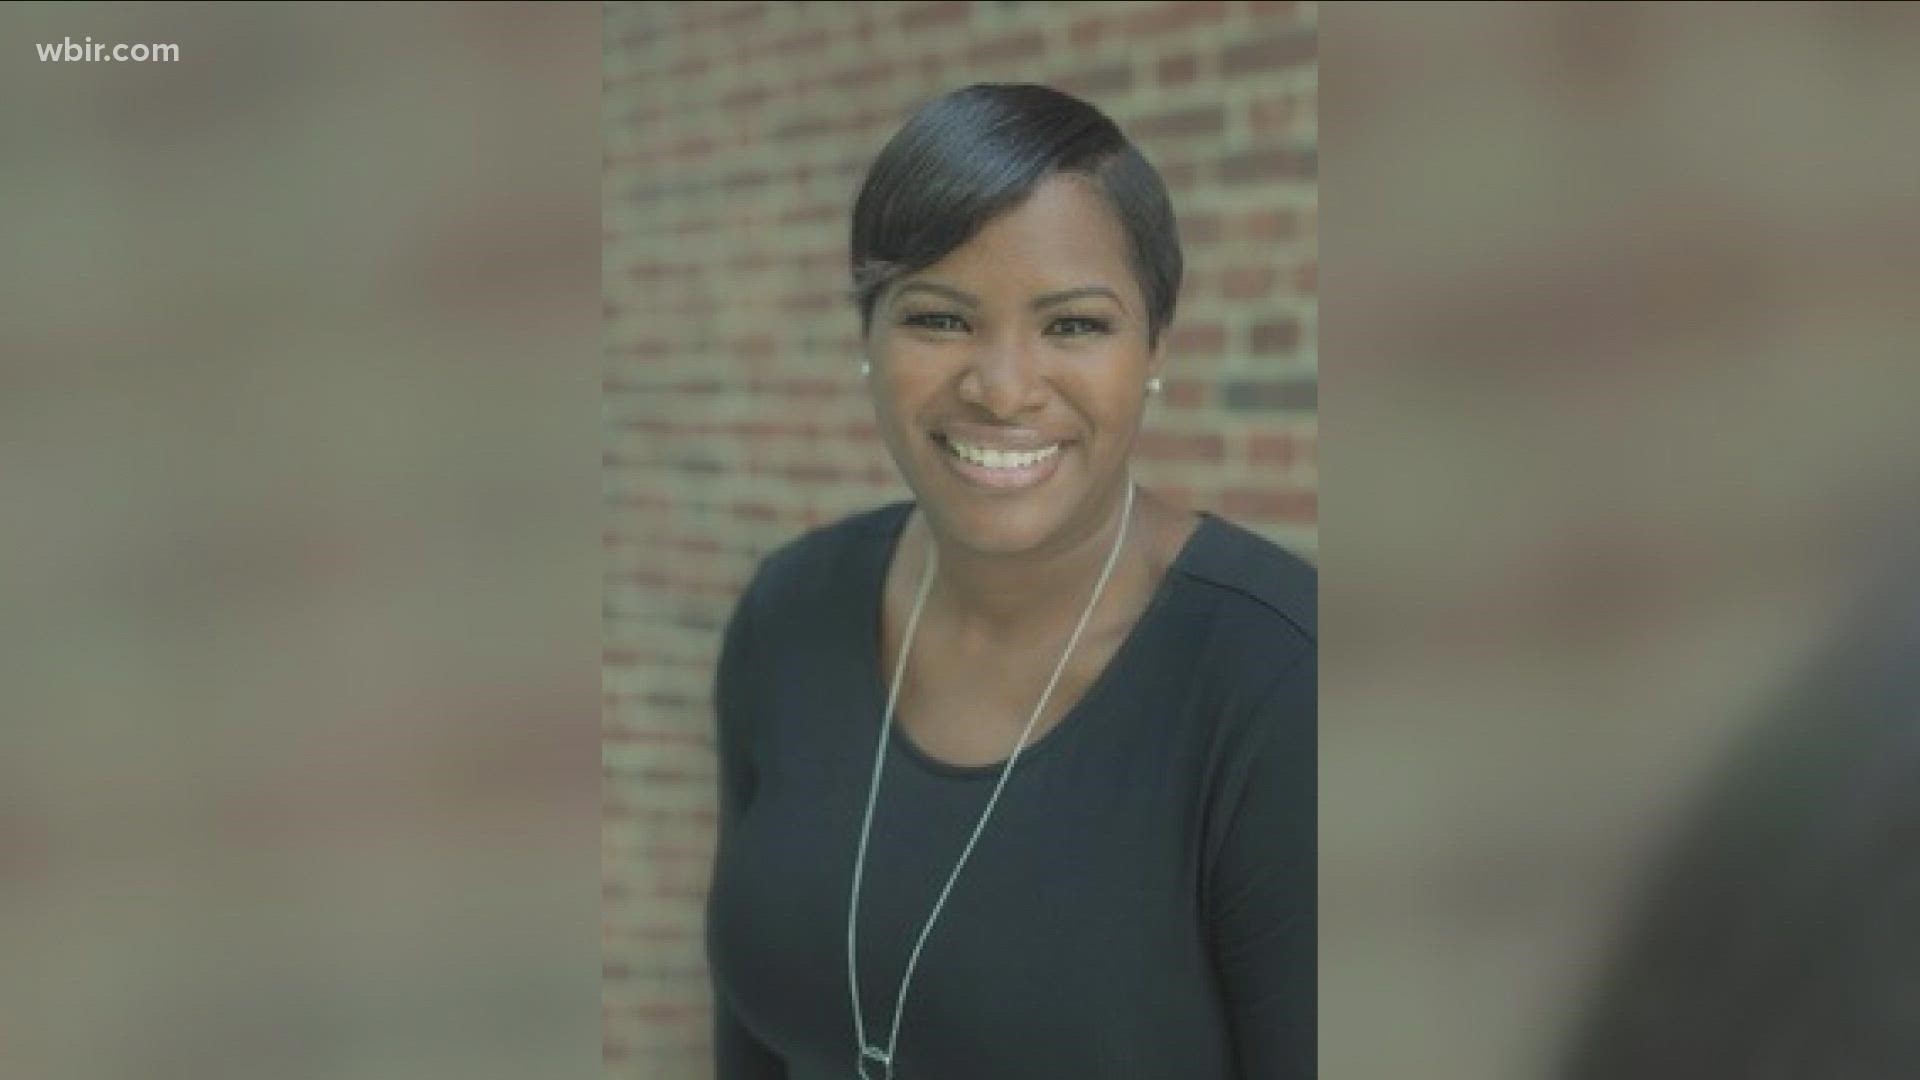 A community leader in Knoxville known as a "good listener" and a champion for children and families is taking over a key police oversight job.